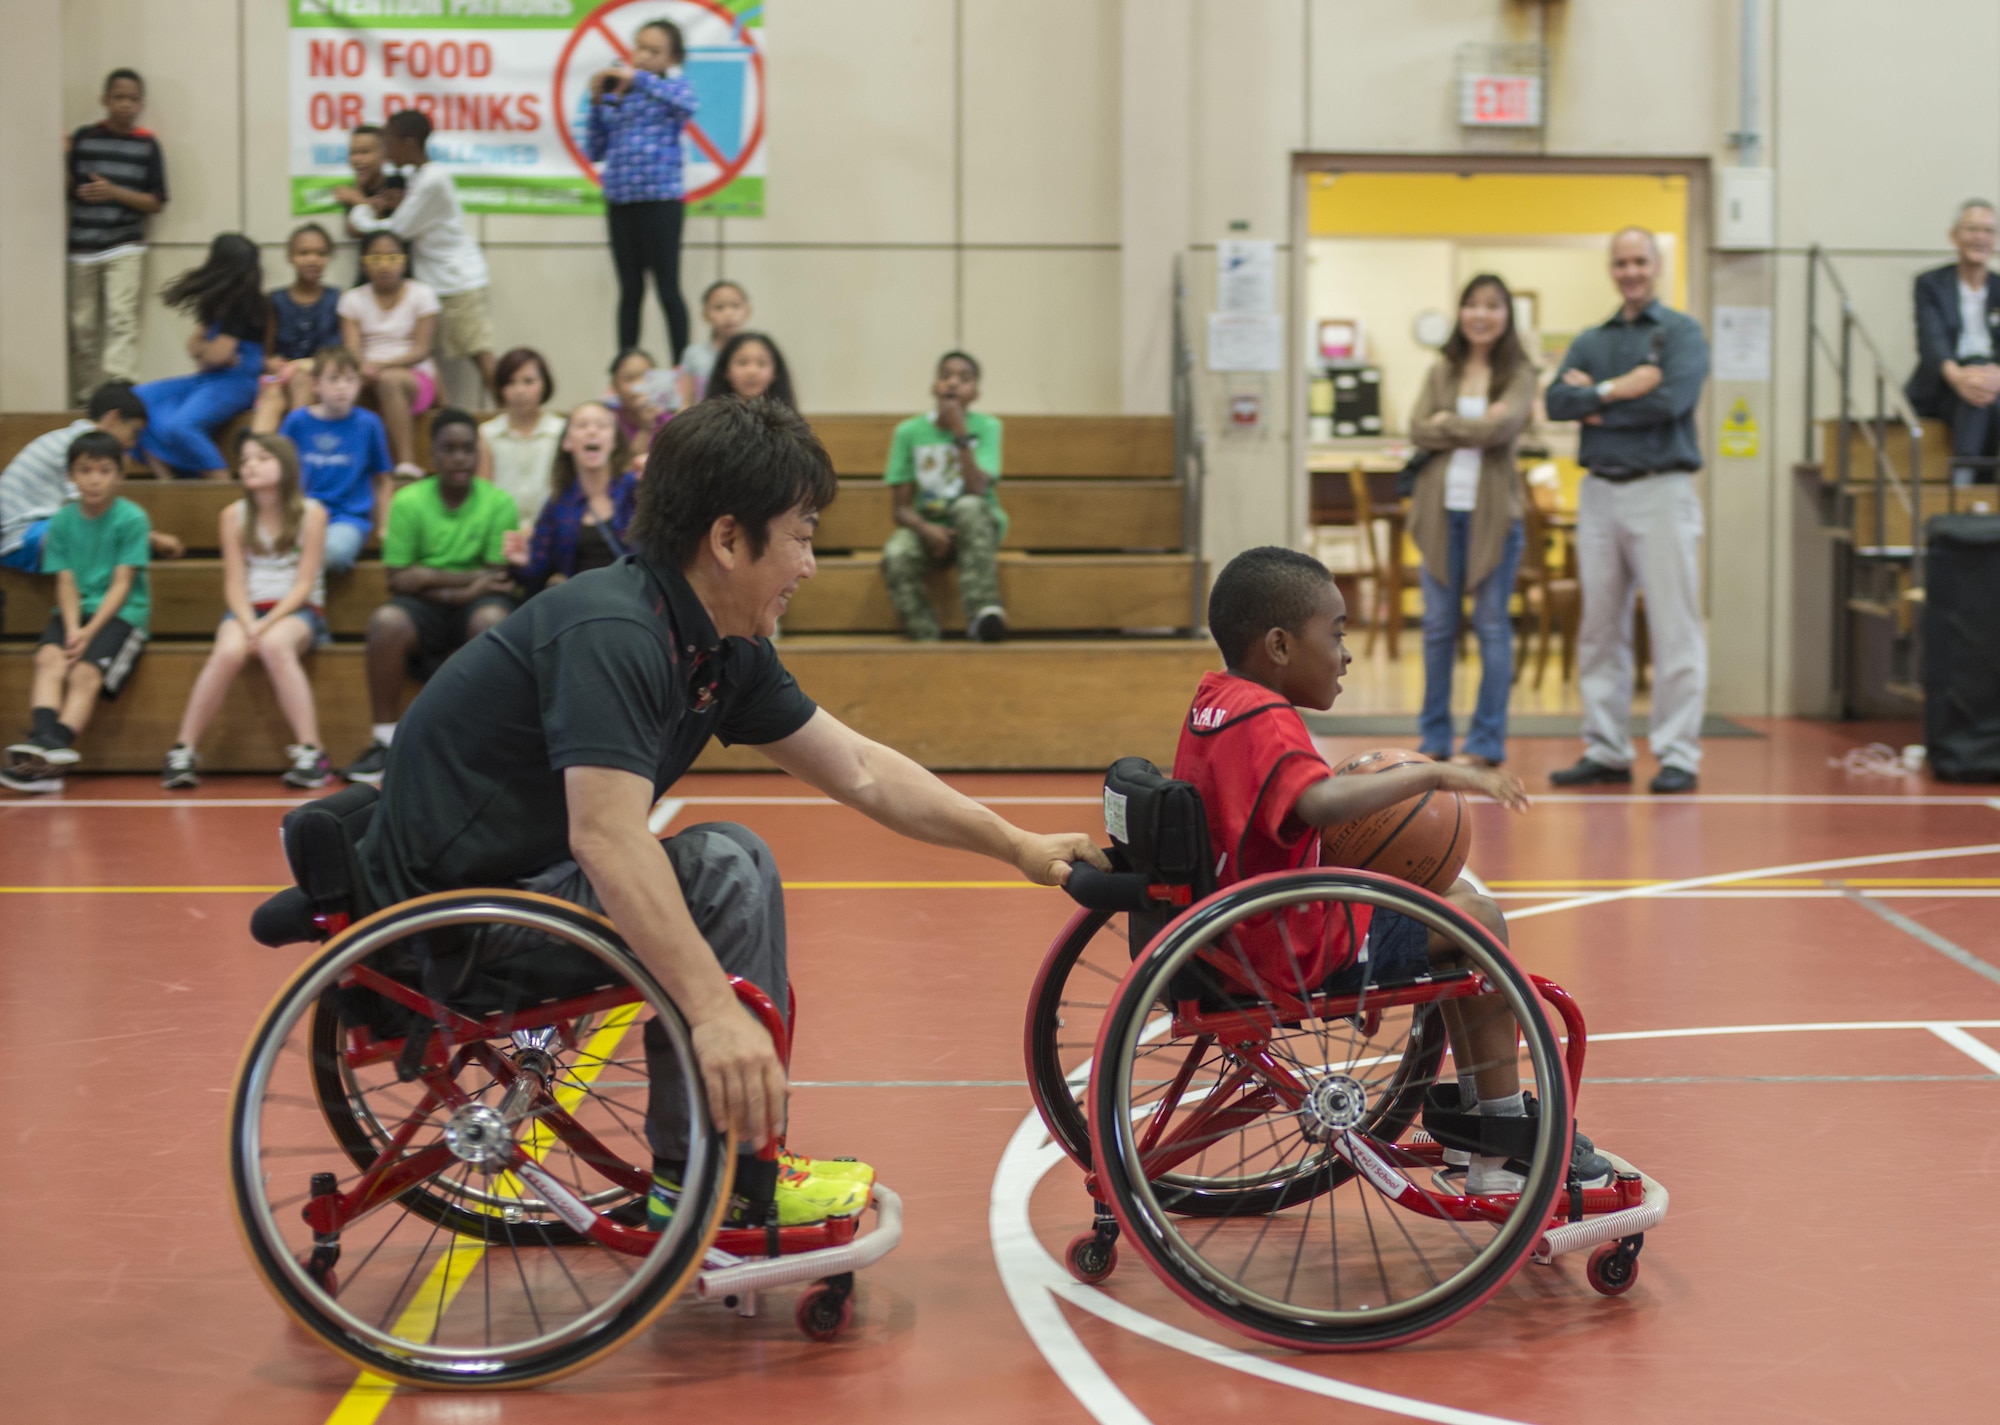 Shinji Negi, a project director with the Nippon Foundation Paralympic Support Center, helps a child at the Lunney Youth Center race to the basketball hoop at Misawa Air Base, Japan, June 28, 2016. Negi travels across the world in order to teach children about life with disabilities and persevering despite difficulties that may occur in life. He was paralyzed from the waist down in high school and went on to become the captain of the Japan Men's National Wheelchair Basketball Team at the 2000 Sydney Paralympic Games. (U.S. Air Force photo by Senior Airman Brittany A. Chase)